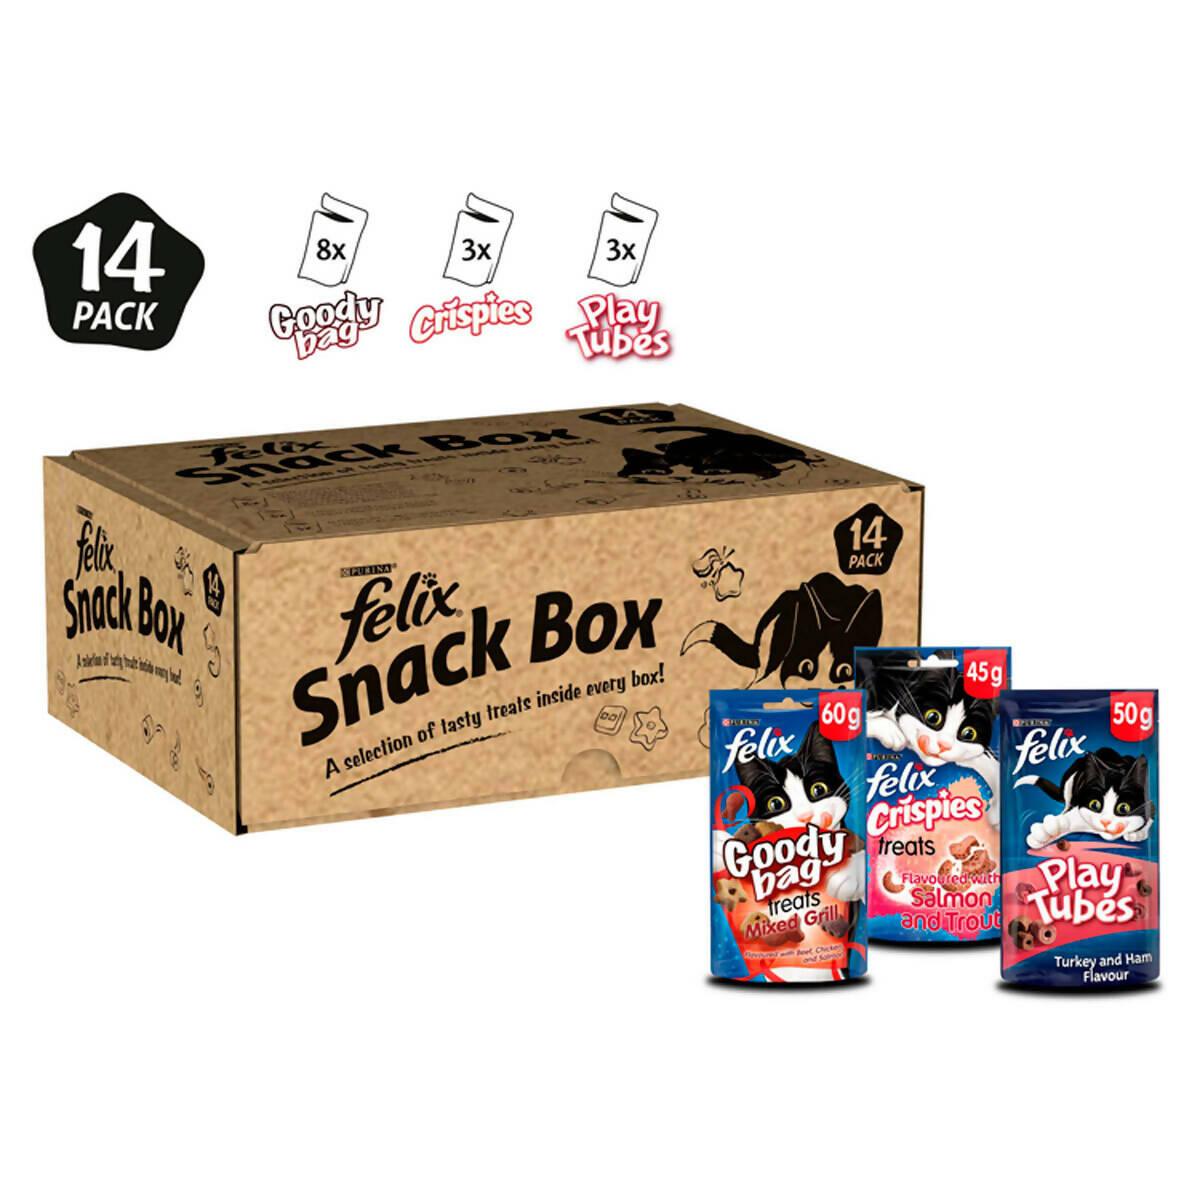 Felix Snack Box Cat Treats in 10 Variations, 765g (Pack of 14) - McGrocer